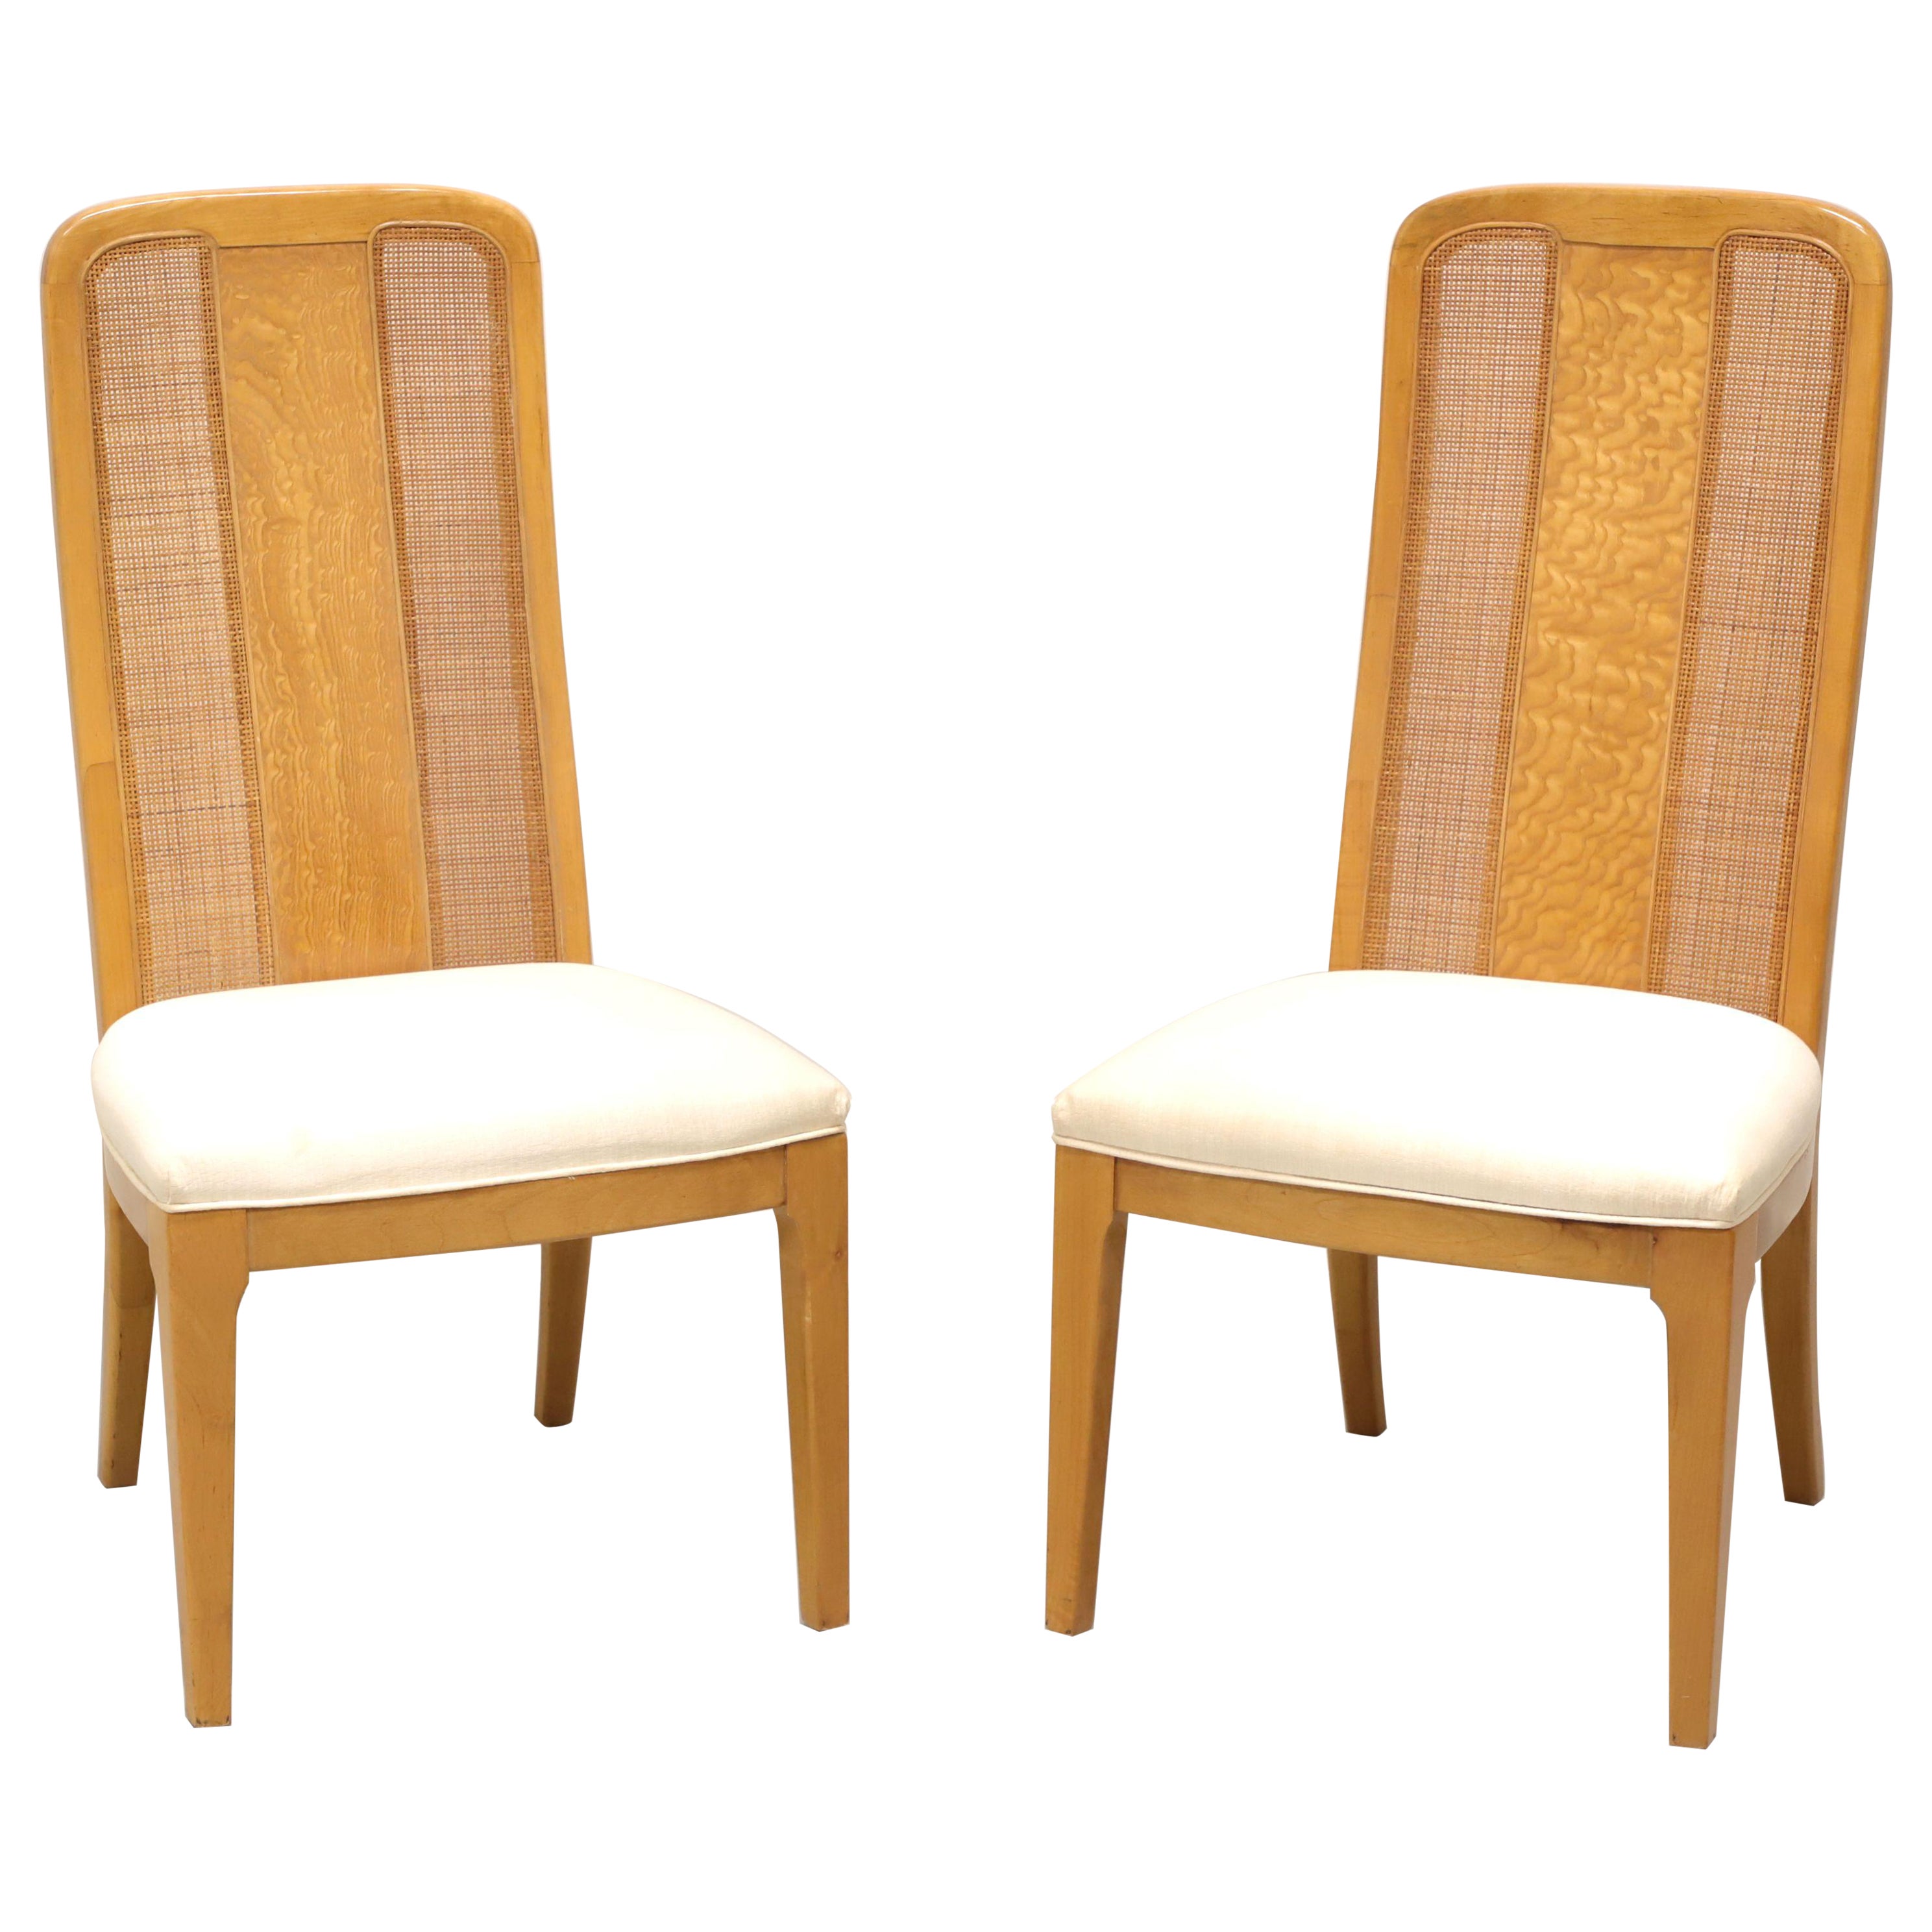 BERNHARDT Caned Burl Maple Contemporary Dining Side Chair - Pair A